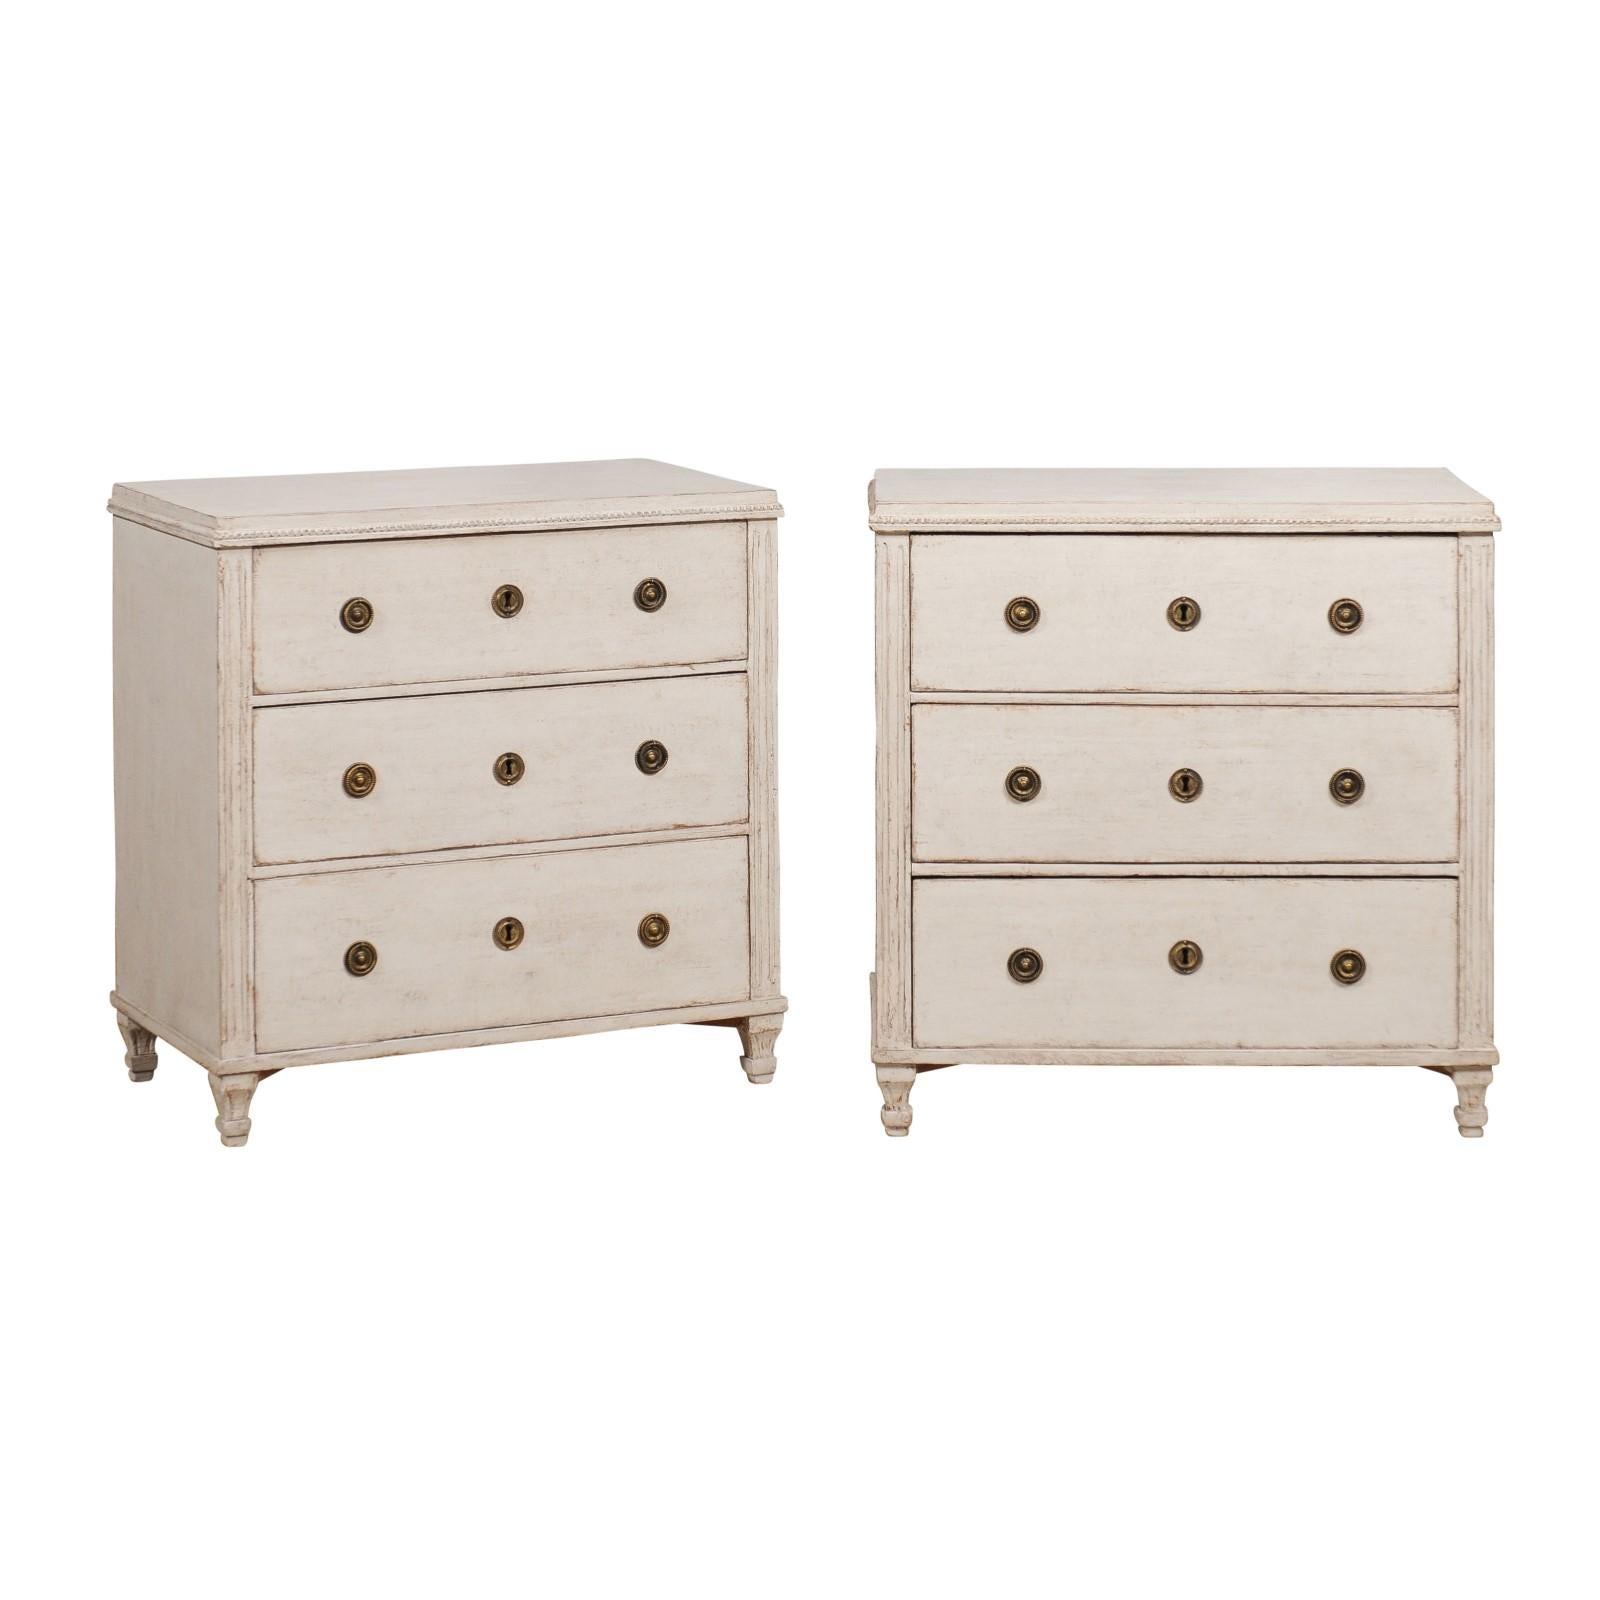 A pair of Swedish Gustavian style three-drawer chests from circa 1880 with gray/beige painted finish, petite carved beads and flutes side posts. Imbued with the tranquil charm characteristic of Swedish Gustavian style, this pair of three-drawer